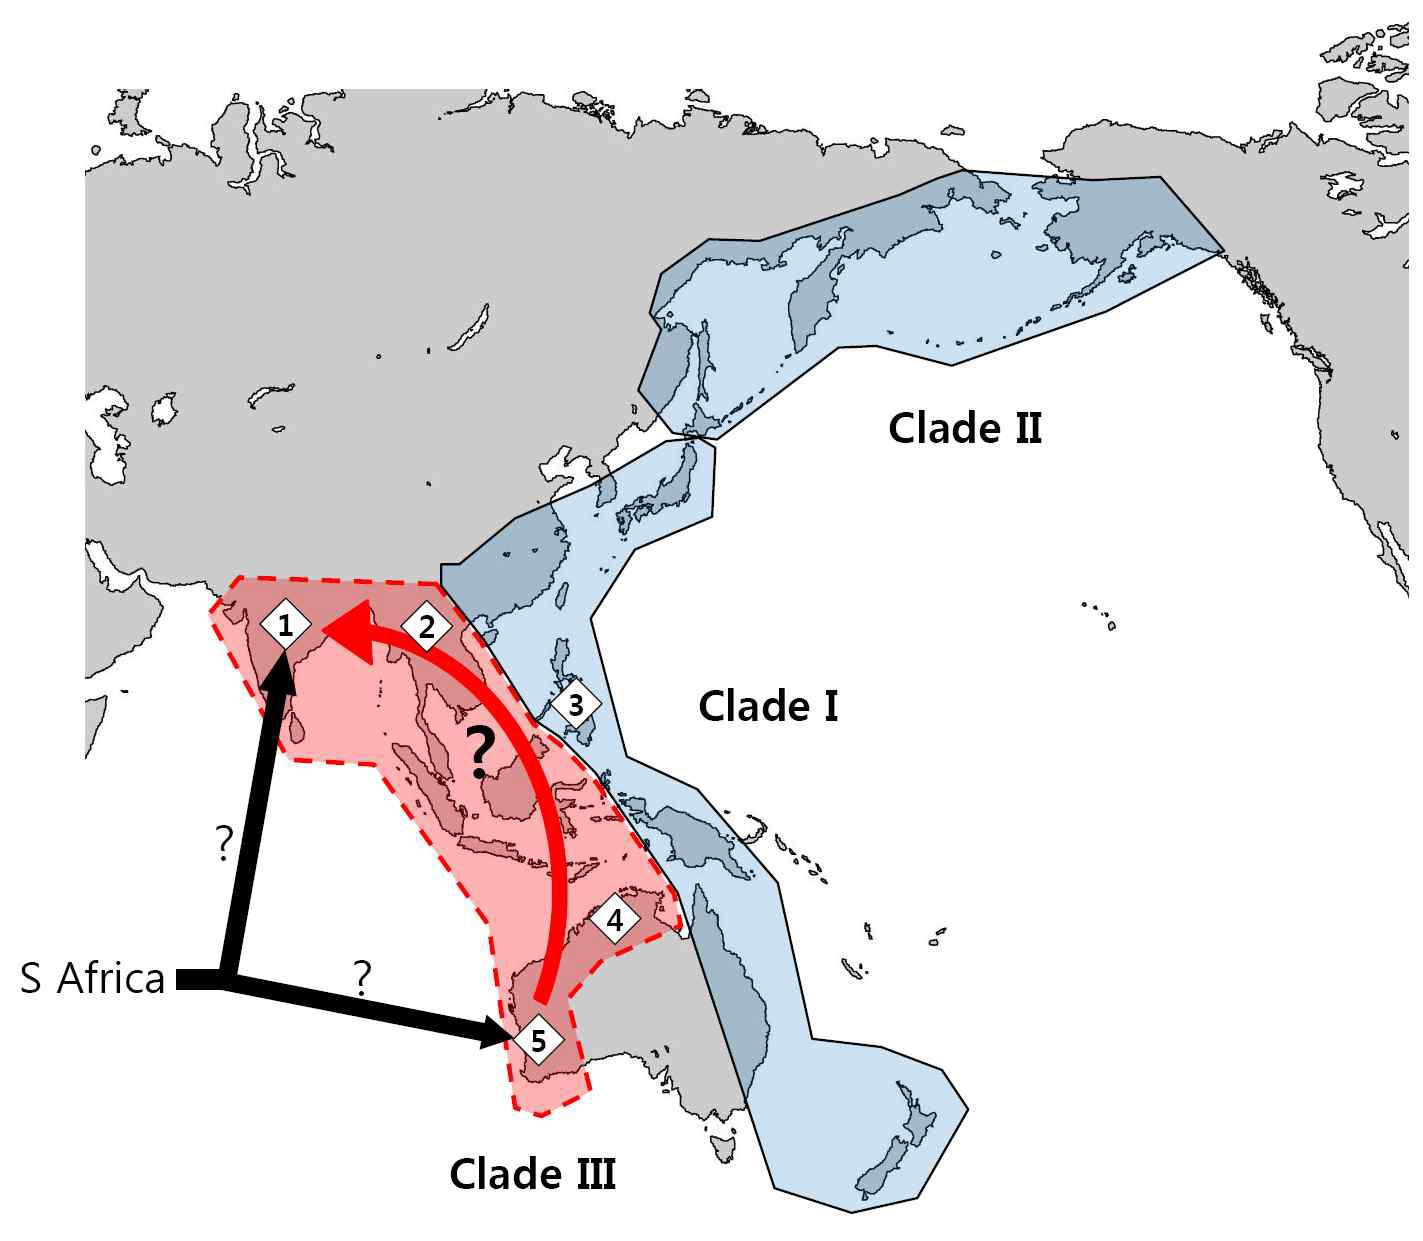 Representation of phylogeny and dispersal hypothesis of Isoetes species. Black arrows indicate hypothesis for origin (Hoot et al., 2006). Red arrow indicates dispersal hypothesis in this study. Distributions of Isoetes species are shown as numericals (1. India; 2. Laos; 3. Philippines; 4. North Australia; 5. West Australia). Clade I and II of East Asian Isoetes were performed in this project.